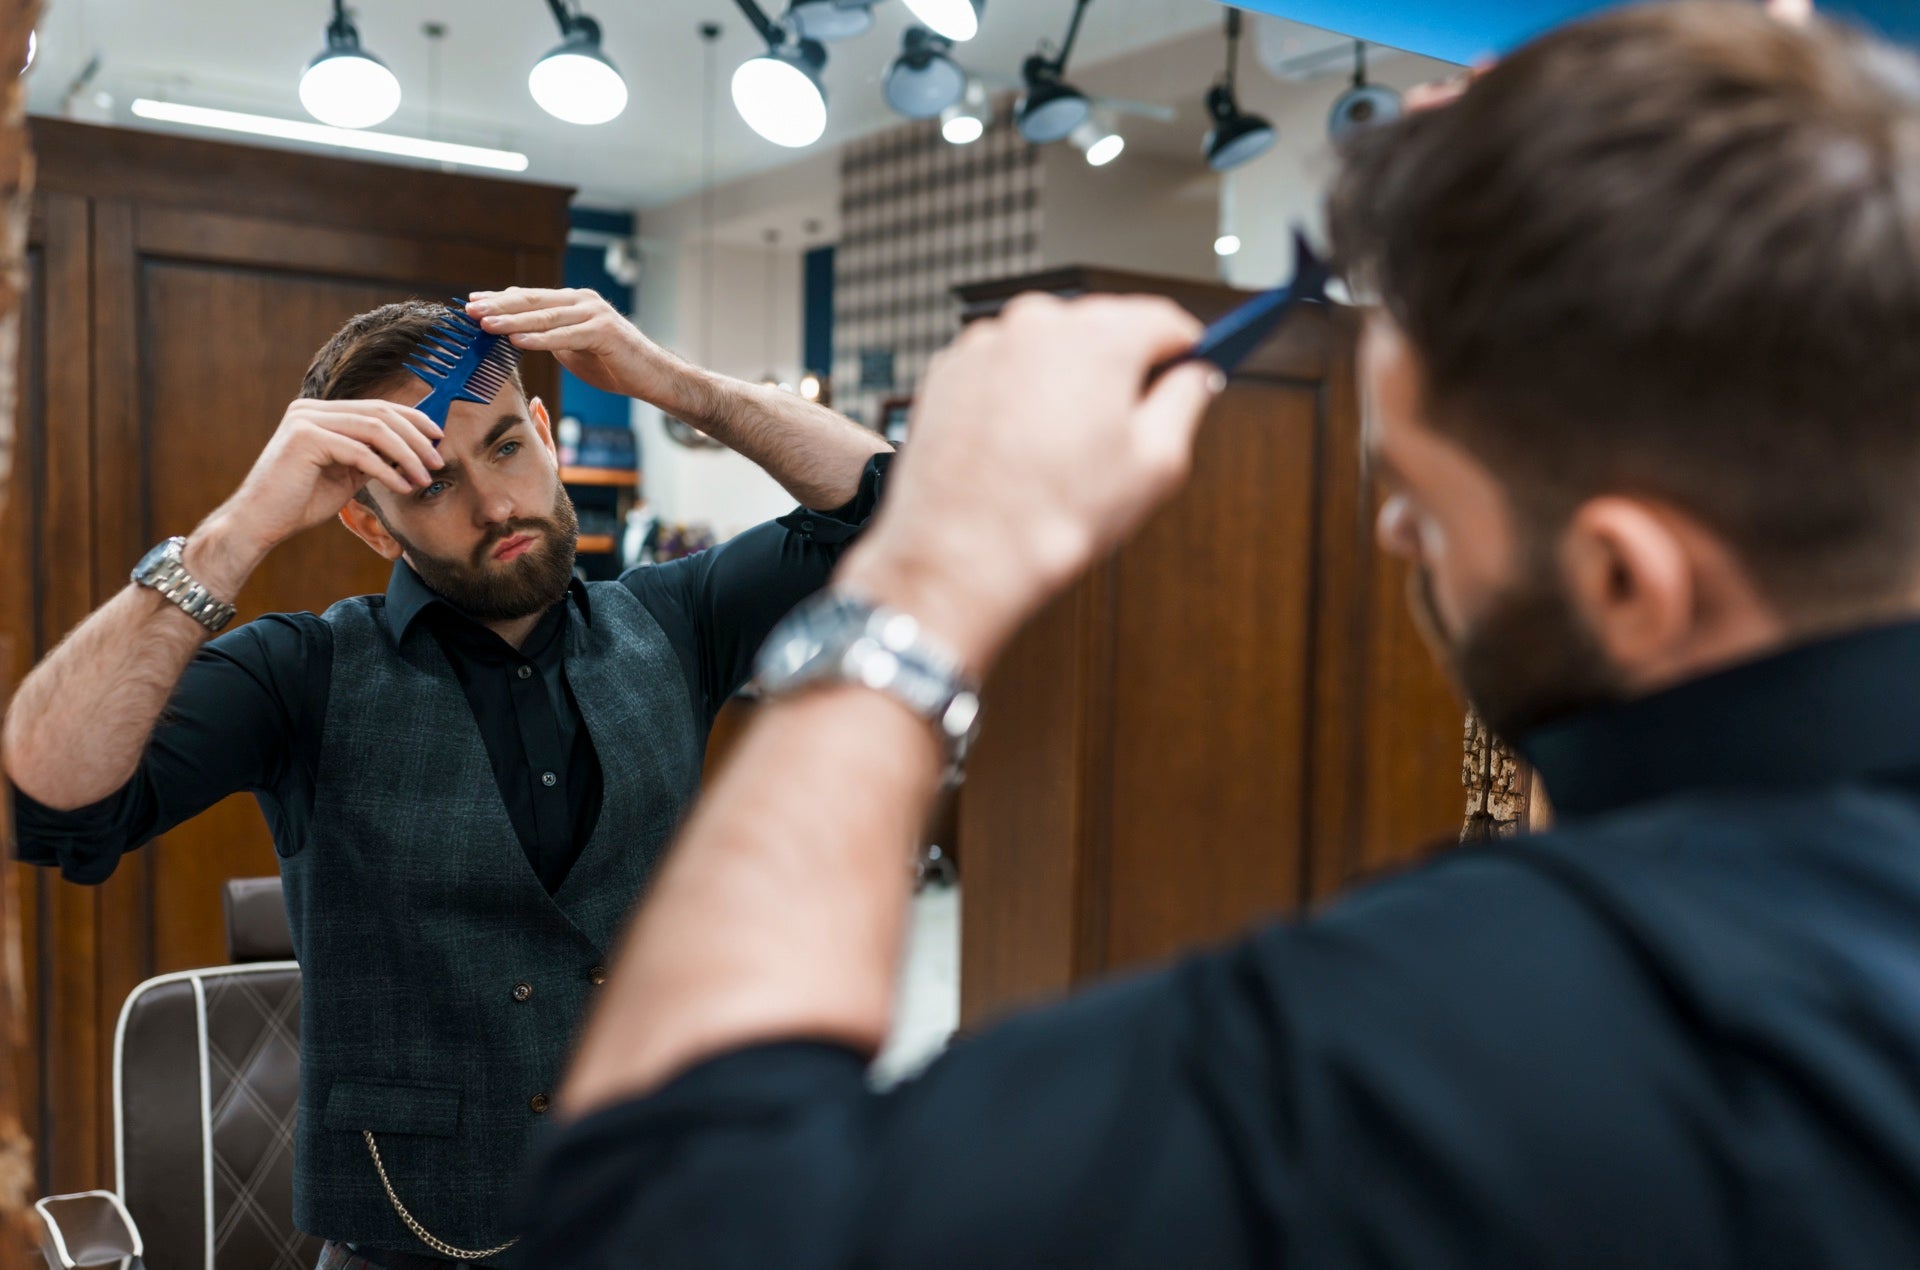 A man carefully adjusting his hairstyle using a blue comb, while checking his reflection in the mirror of a modern barbershop.